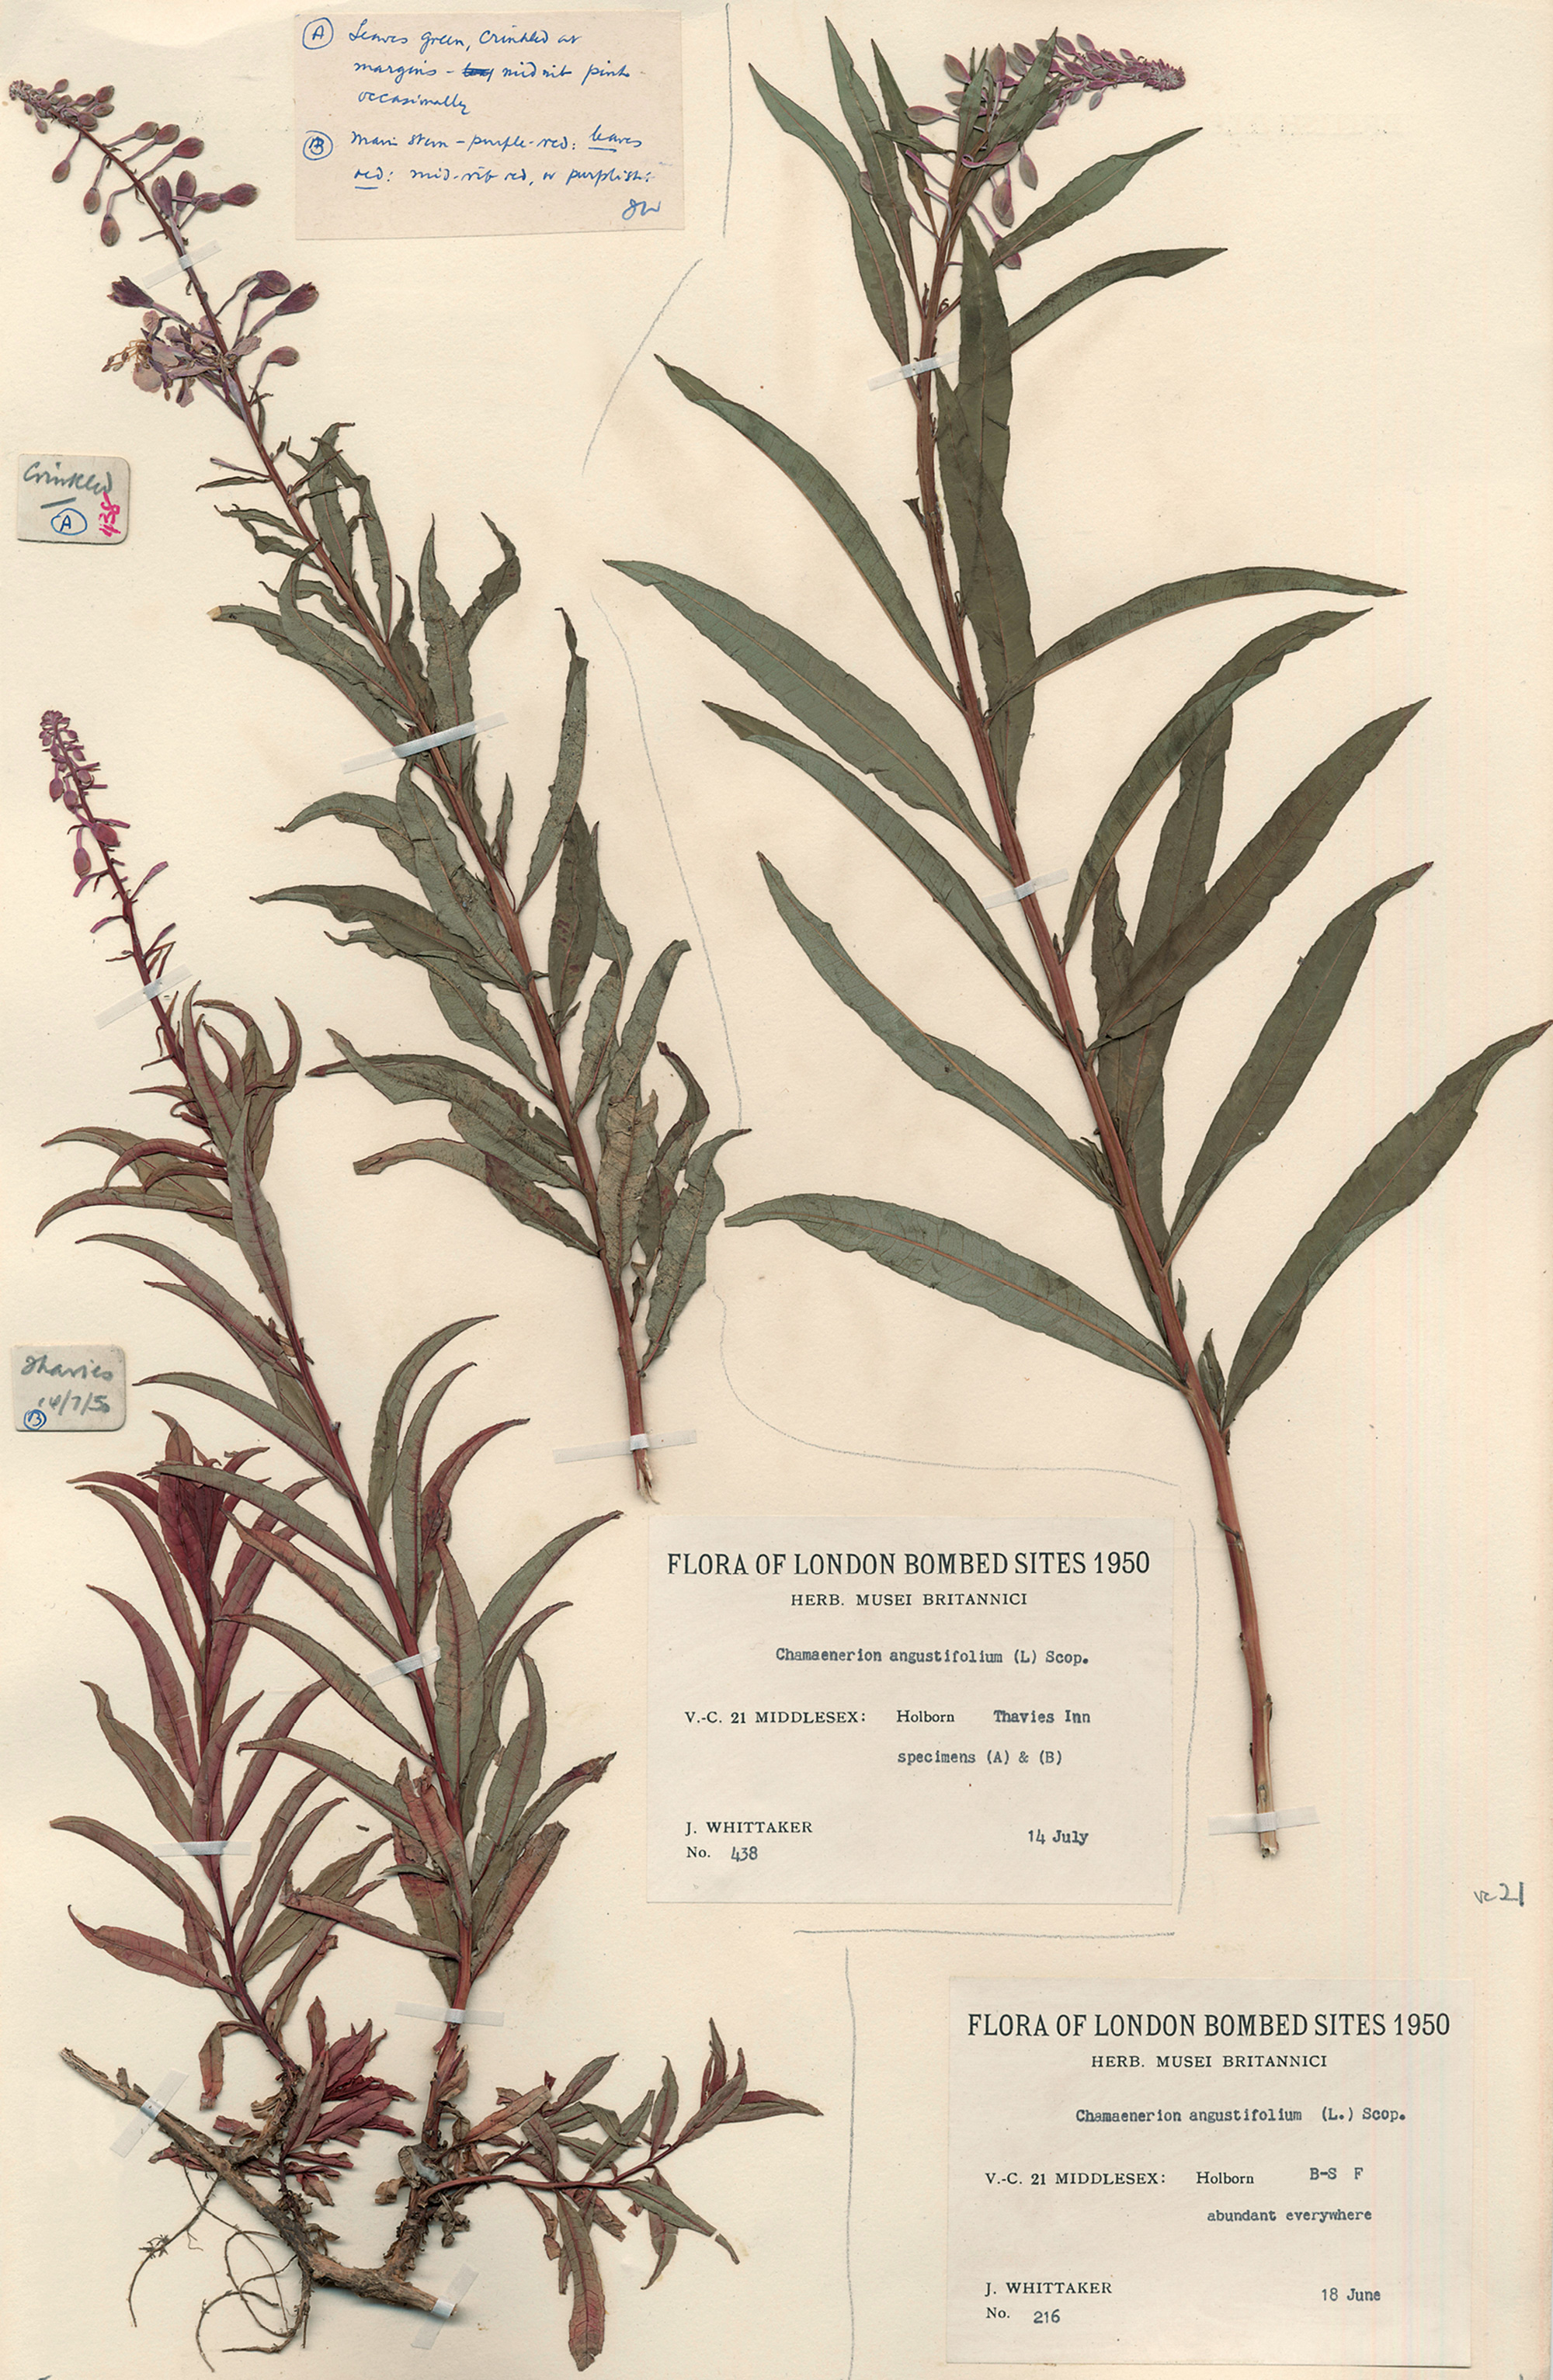 Pressed specimen of Chamerion angustifolium, also known as Epilobium angustifolium. This specimen of bombweed was collected during the London Natural History Society’s City Bombed Sites Survey in 1950. A member of the society that conducted the survey wrote of Cripplegate, the neighborhood in which it was collected: “This area in the very heart of London provides a splendid opportunity to members of the society for recording the colonisation and establishment of a new fauna and flora which, its is to be hoped, will not occur again.” Courtesy Natural History Museum, London.